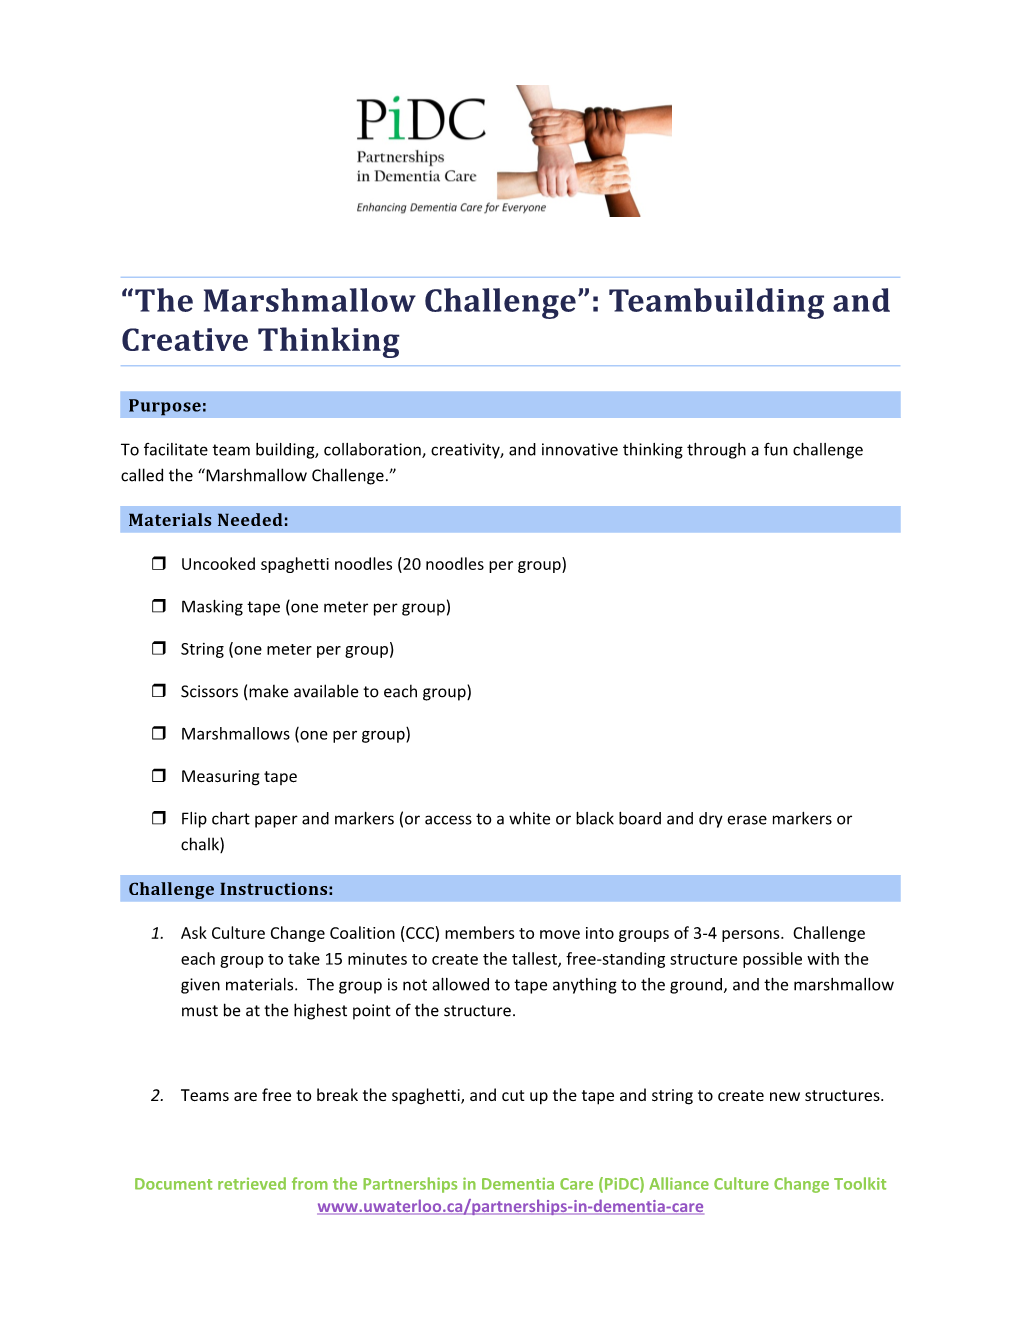 The Marshmallow Challenge : Teambuilding and Creative Thinking